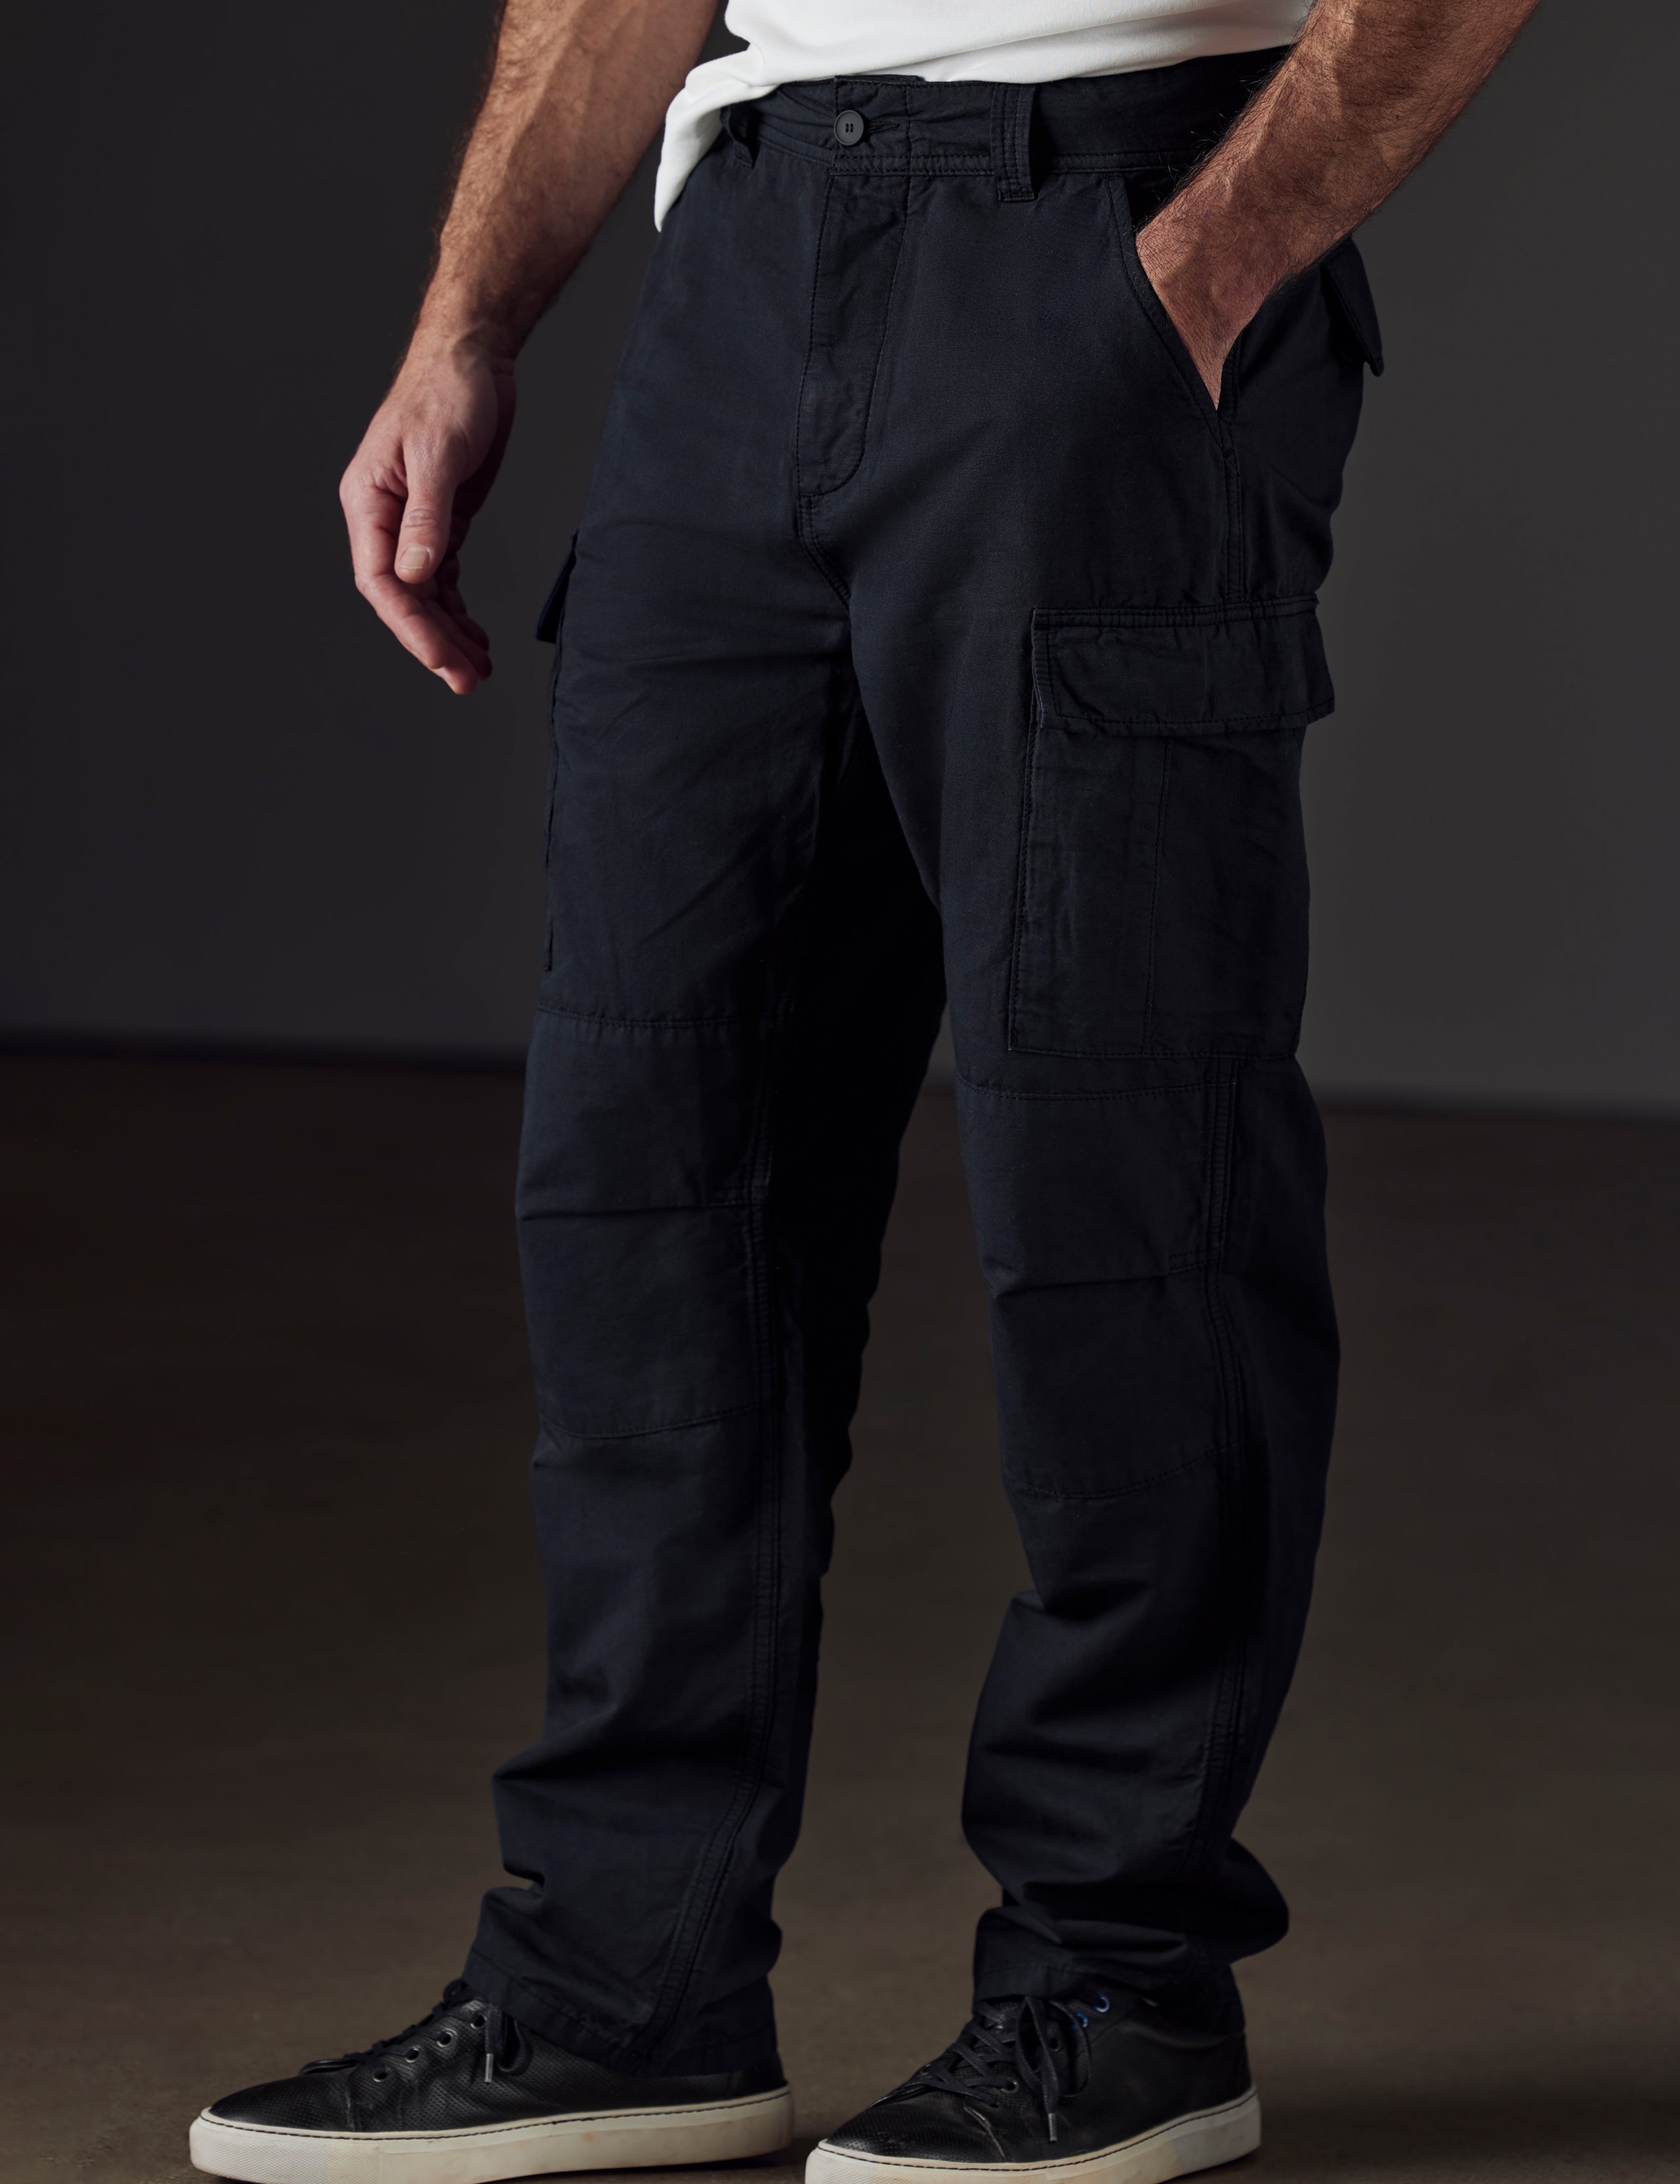 black fatigue pants from AETHER Apparel